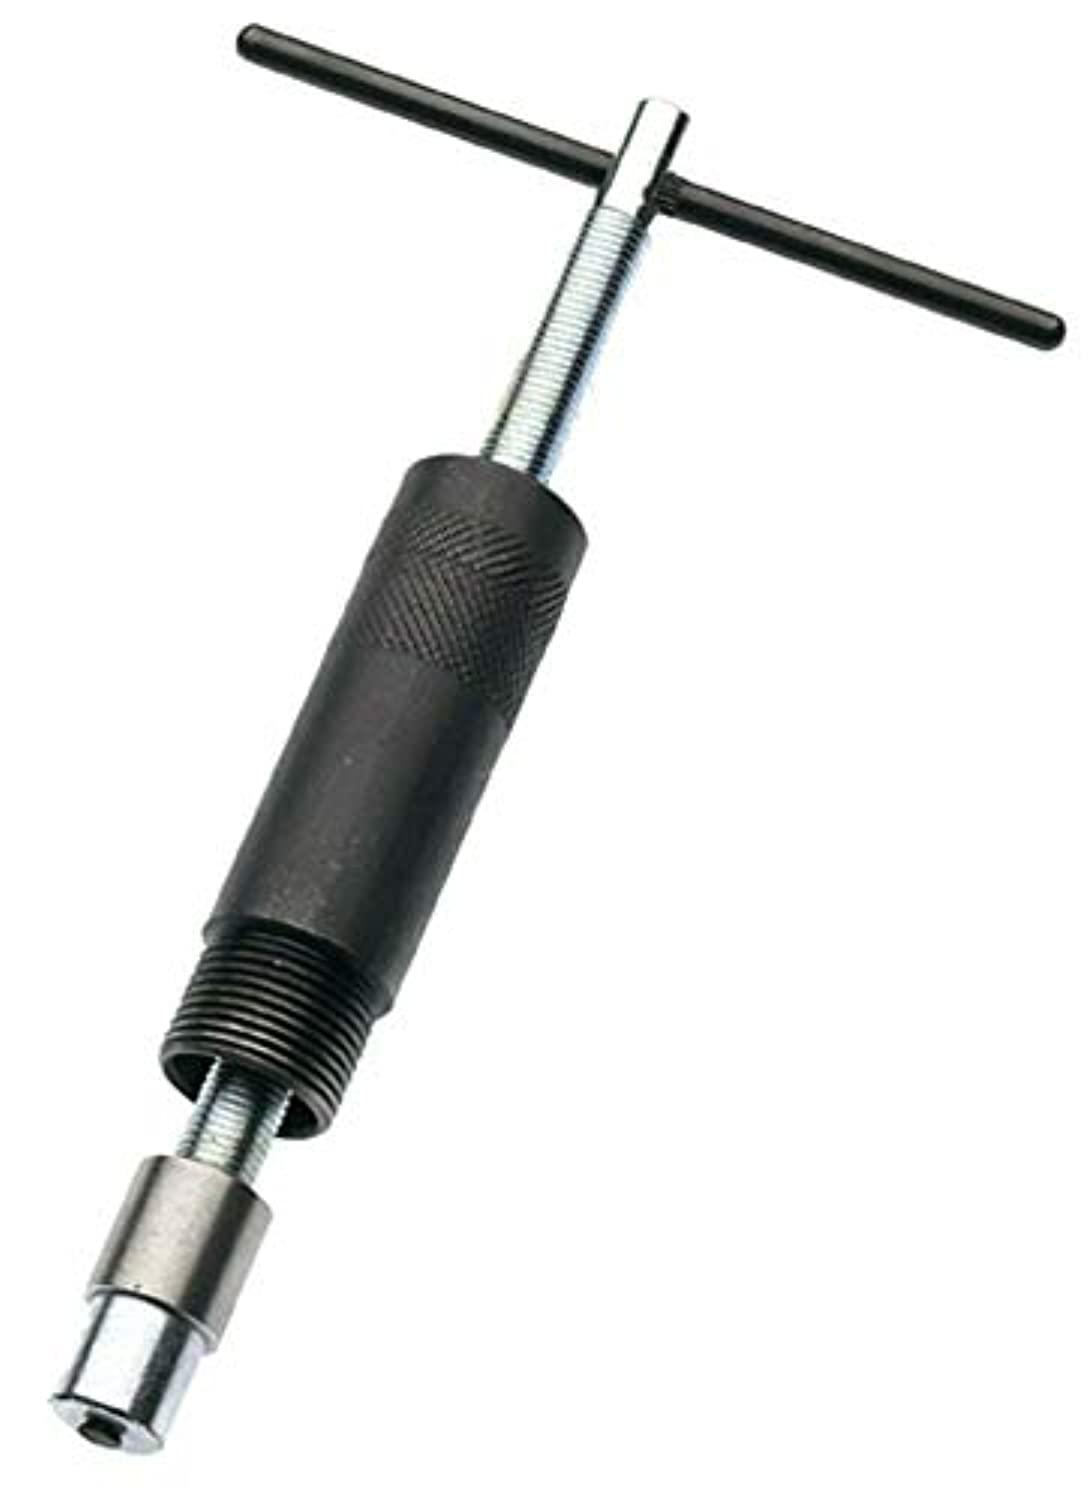 Amelia superior tool 03943 compression sleeve puller and sleeve remover for 1/2-inch co